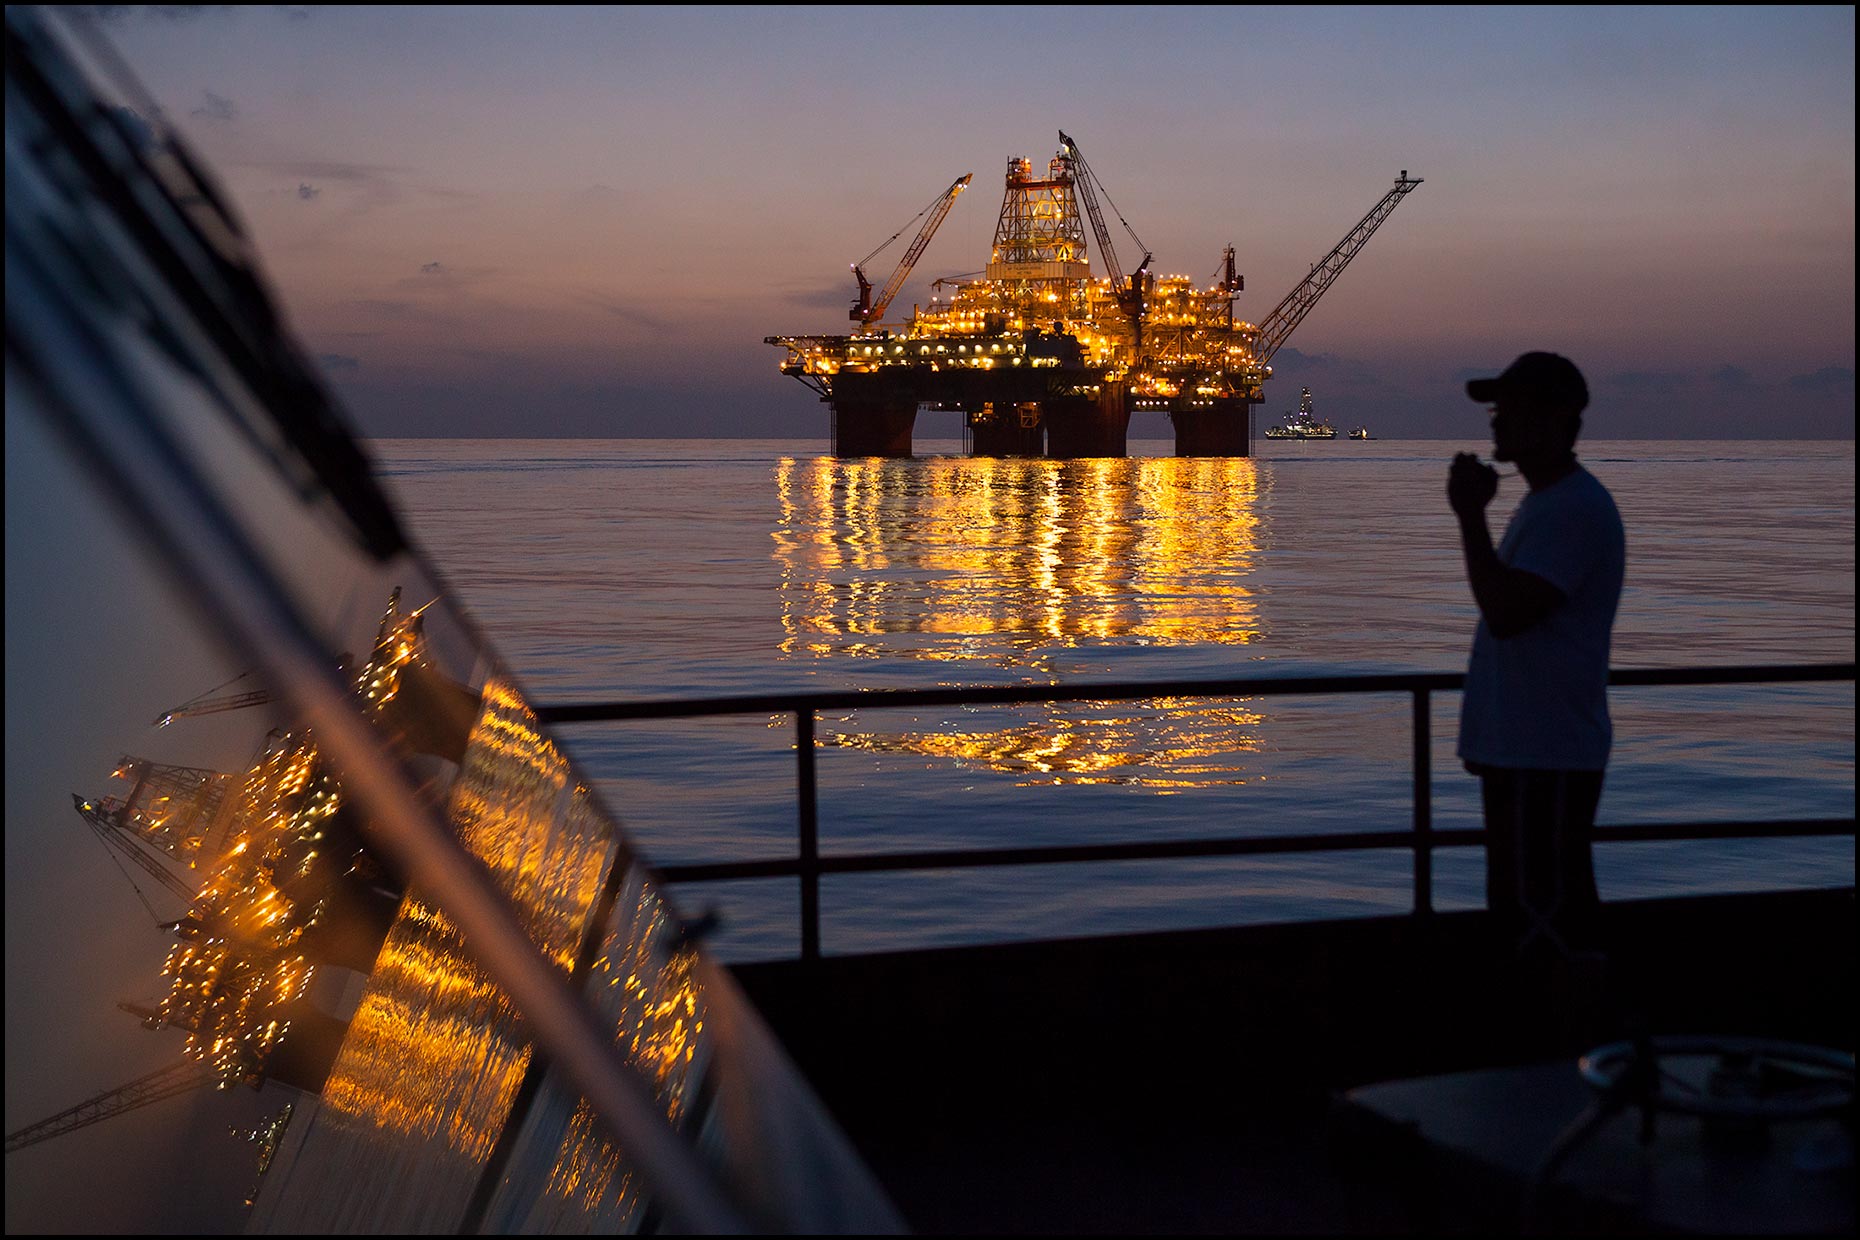 Silhouette of the first mate standing on the deck of a supply vessel at twilight with a large offshore rig in the distance.